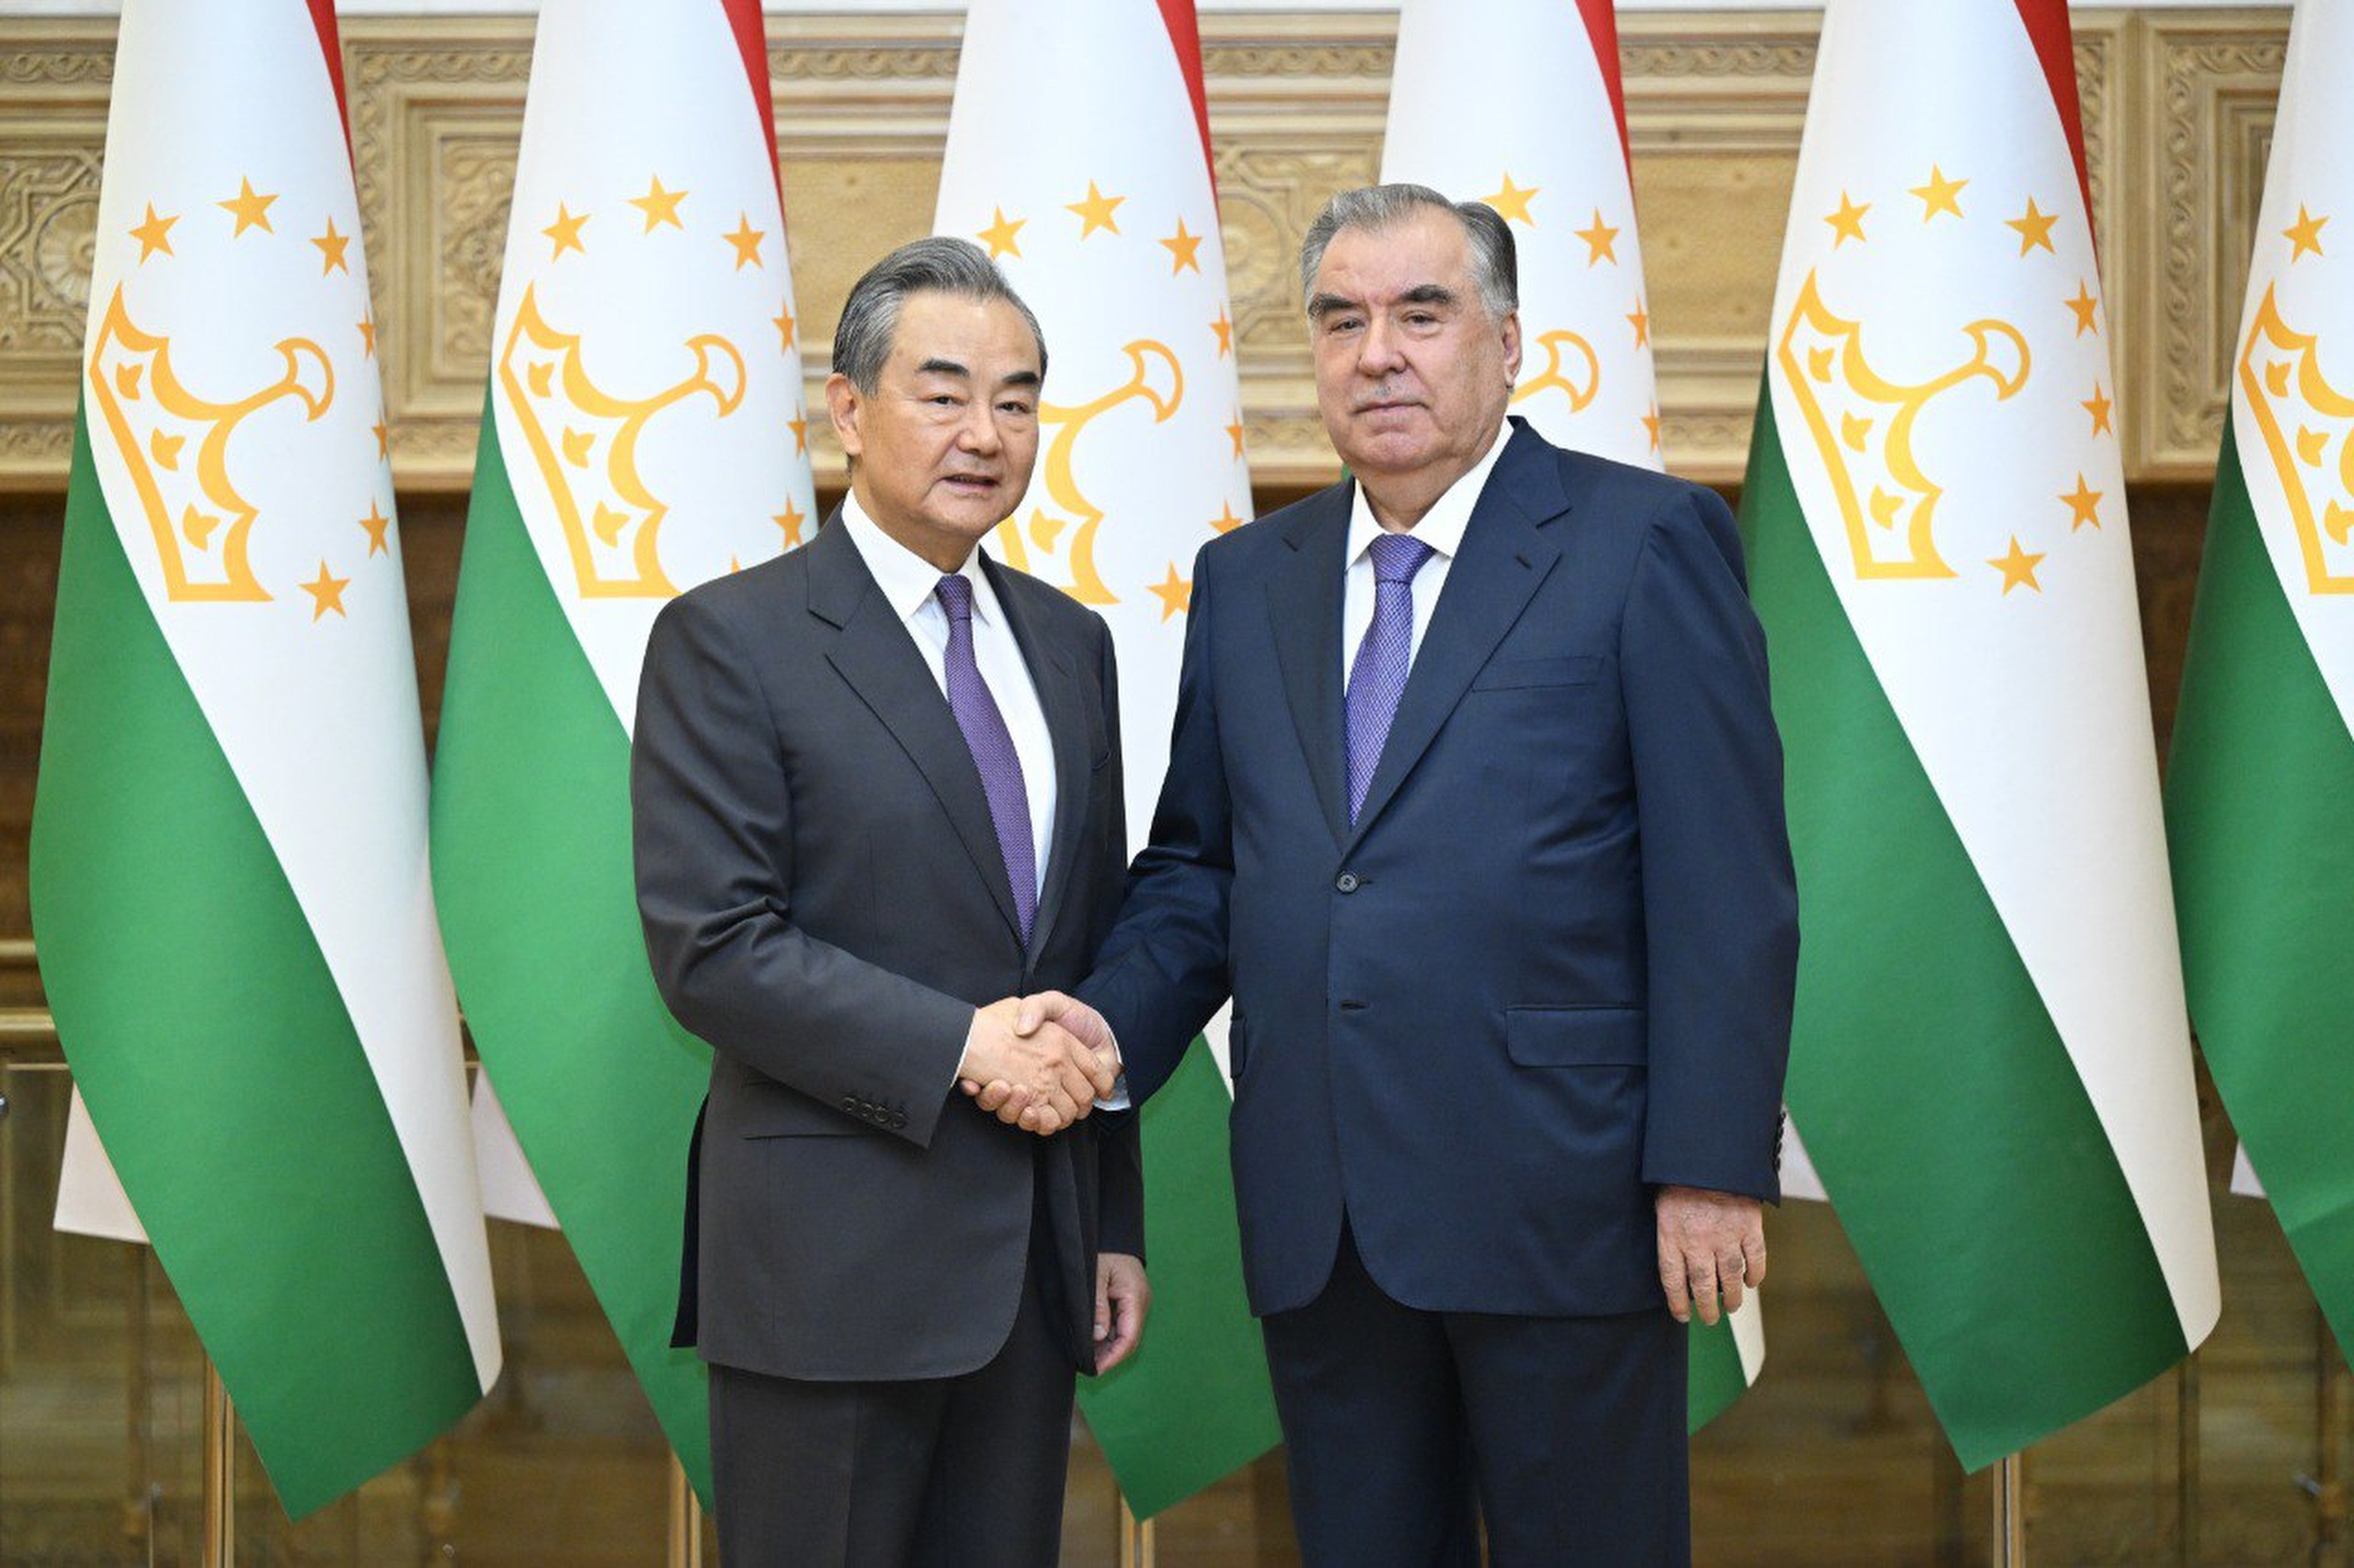 Chinese Foreign Minister Wang Yi meets Tajikistan’s President Emomali Rahmon at his official residence in the capital Dushanbe on Saturday. Photo: Handout